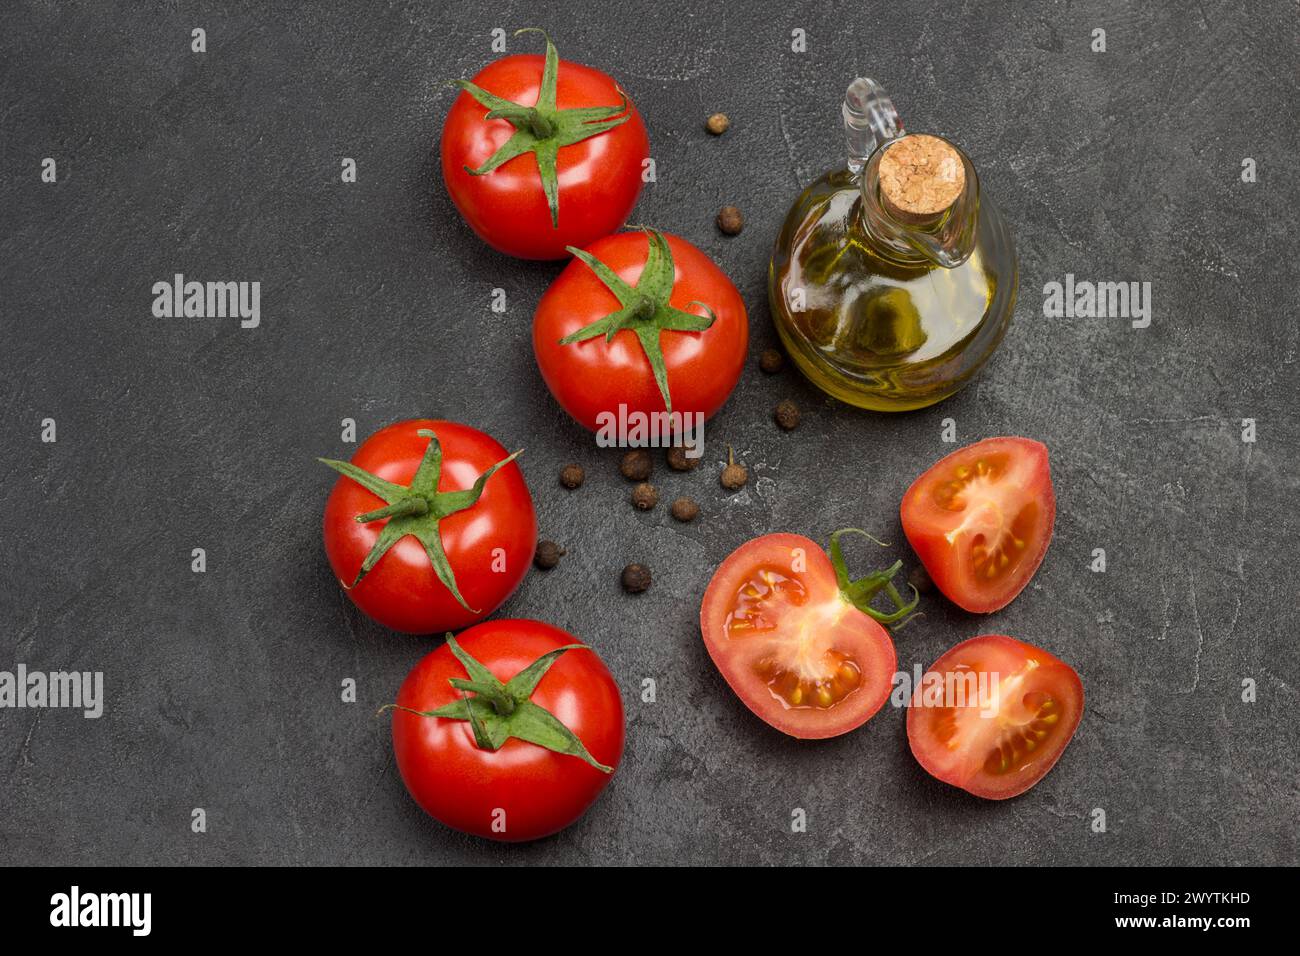 Whole tomato and chopped tomato wedges, allspice on table.  Bottle of olive oil and sprig of rosemary.  Black background. Top view. Stock Photo